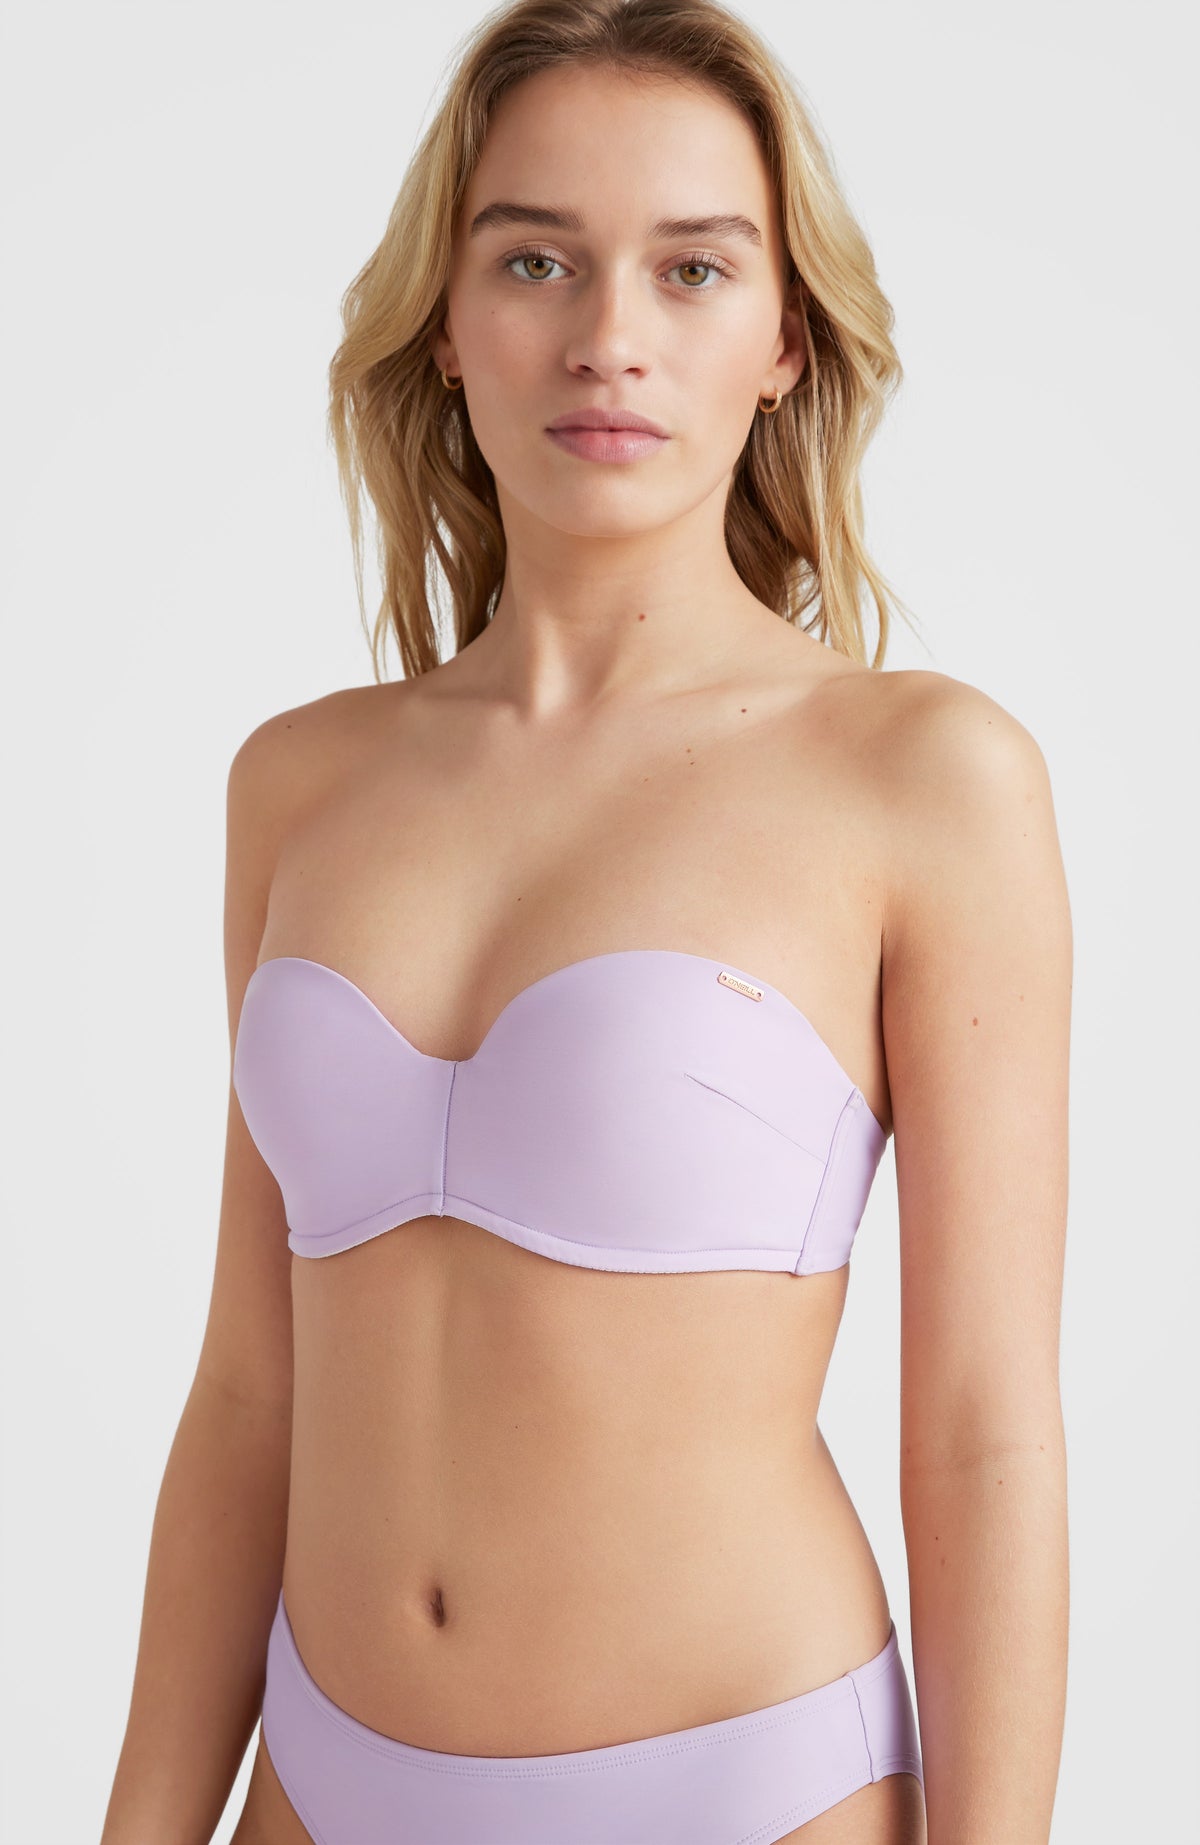 Urban Outfitters Strappy Back Halter Bra Purple - $14 (60% Off